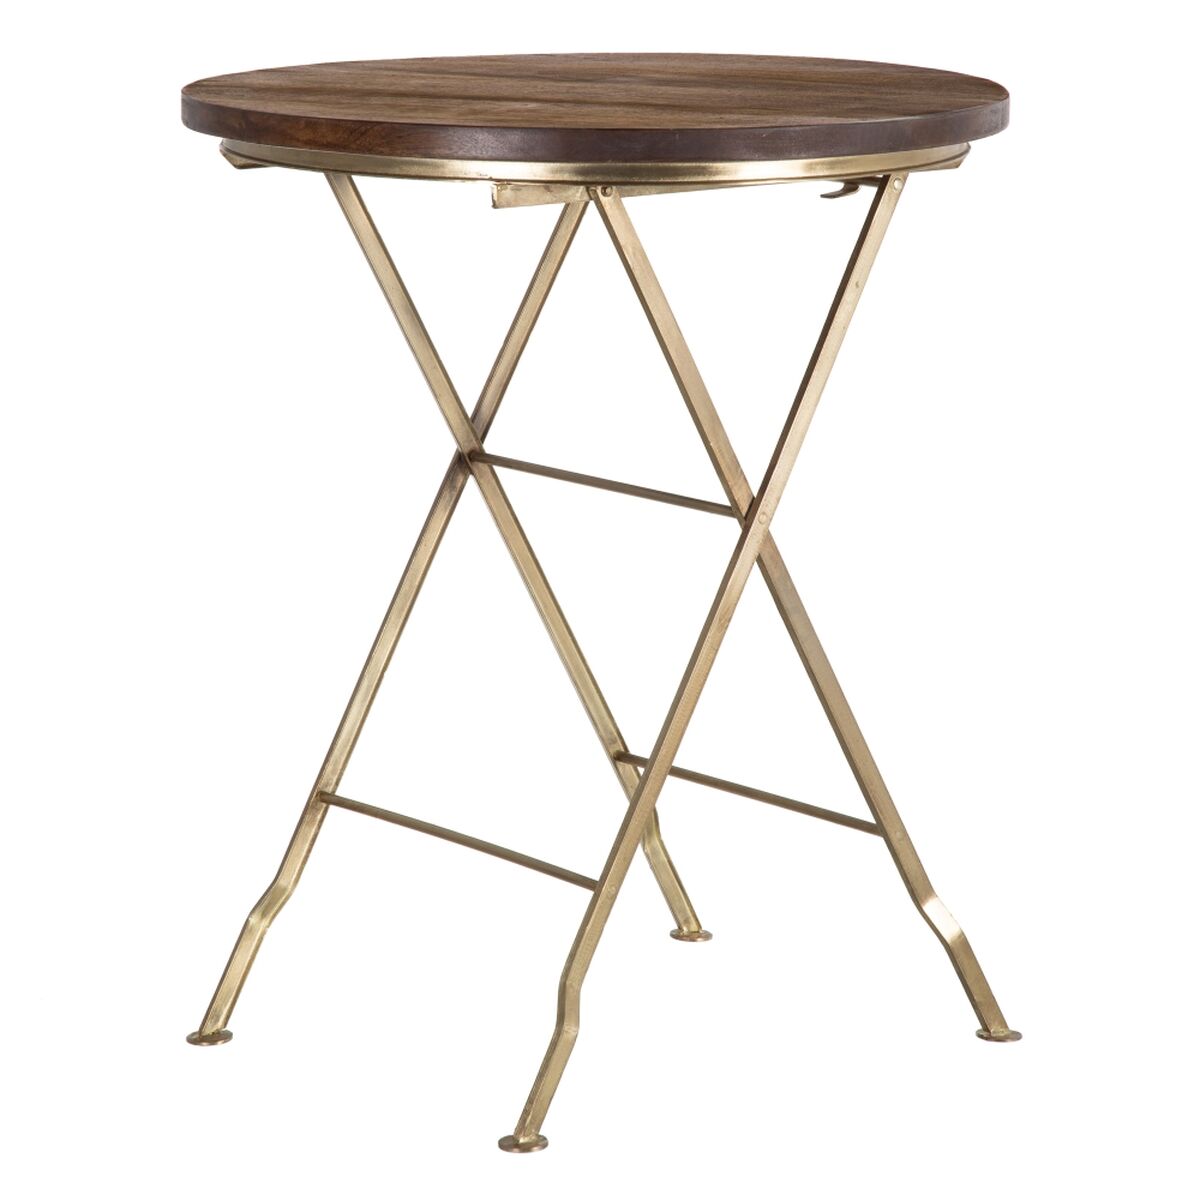 Side table in Wood and Golden Metal (66 x 66 x 78 cm)